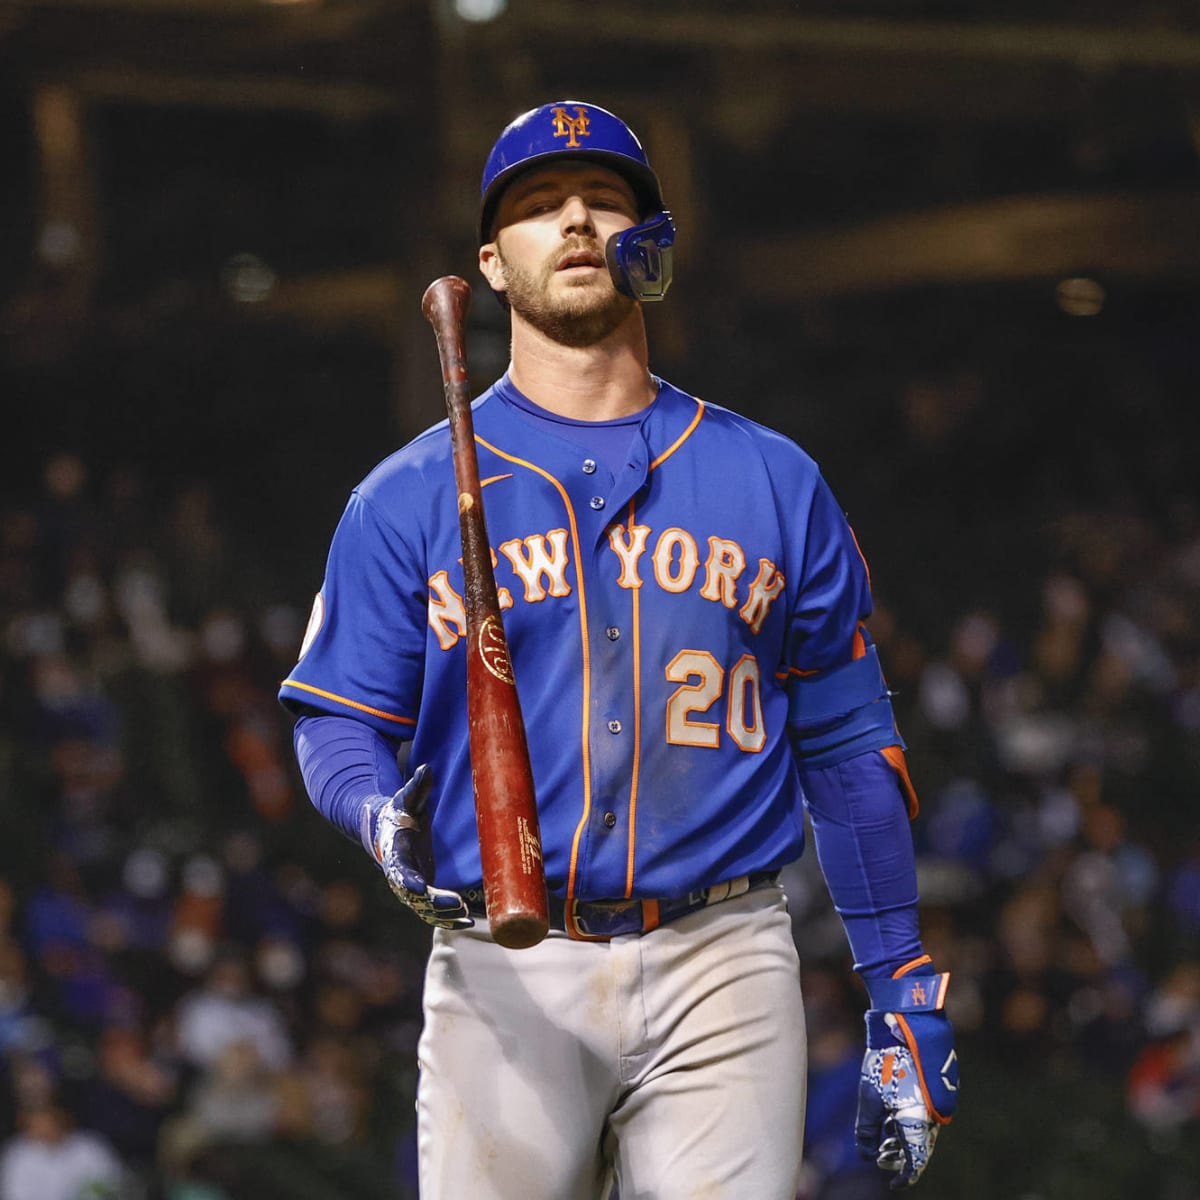 Peter Alonso gives Mets fans glimmer of hope - Minor League Ball